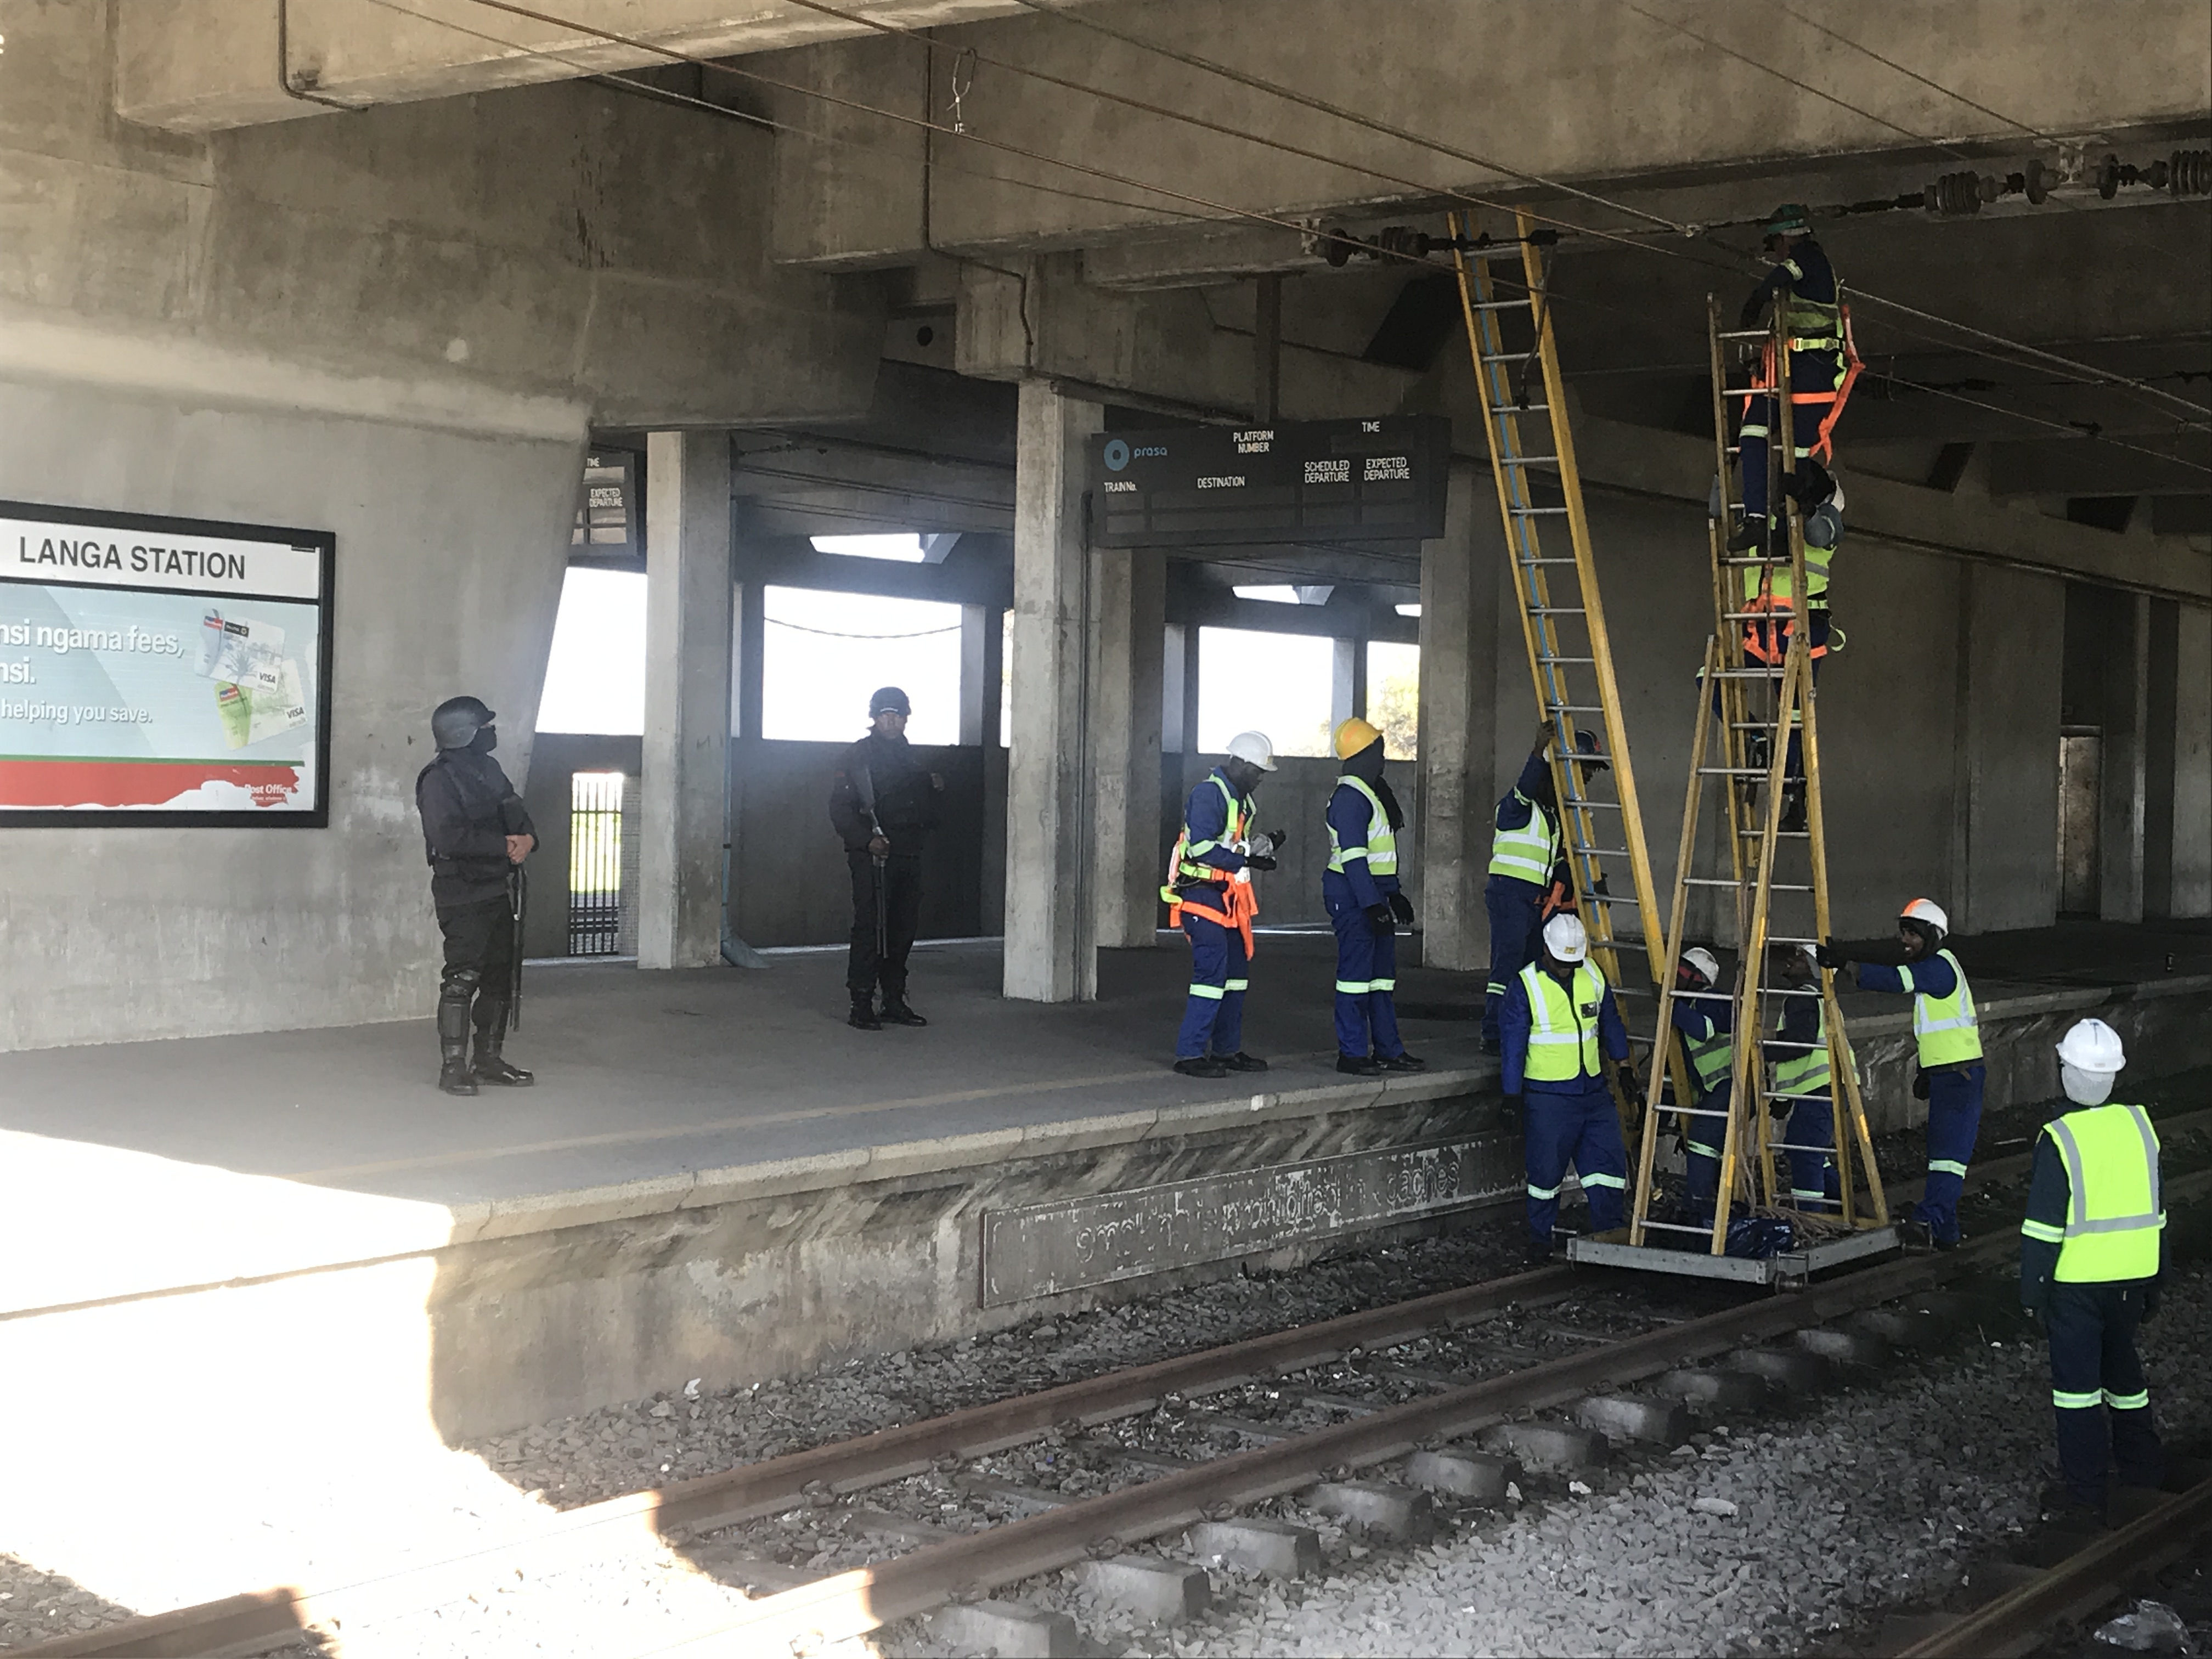 Railway workers attend to overhead cables at Langa Station. Khayelitsha 